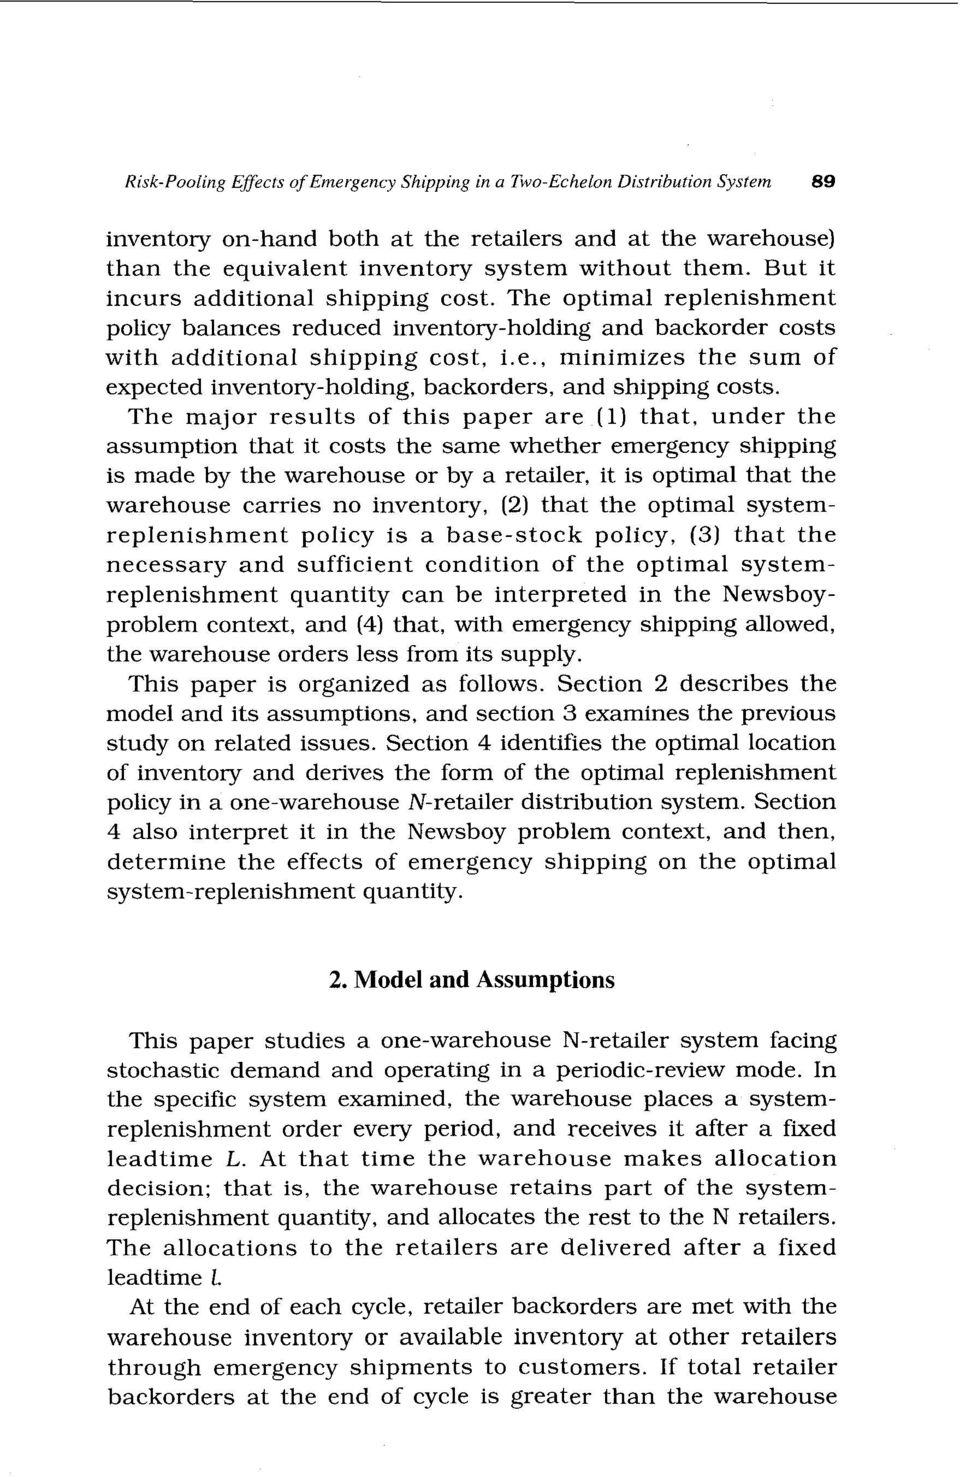 The major results of this paper are (1) that, under the assumption that it costs the same whether emergency shipping is made by the warehouse or by a retailer, it is optimal that the warehouse